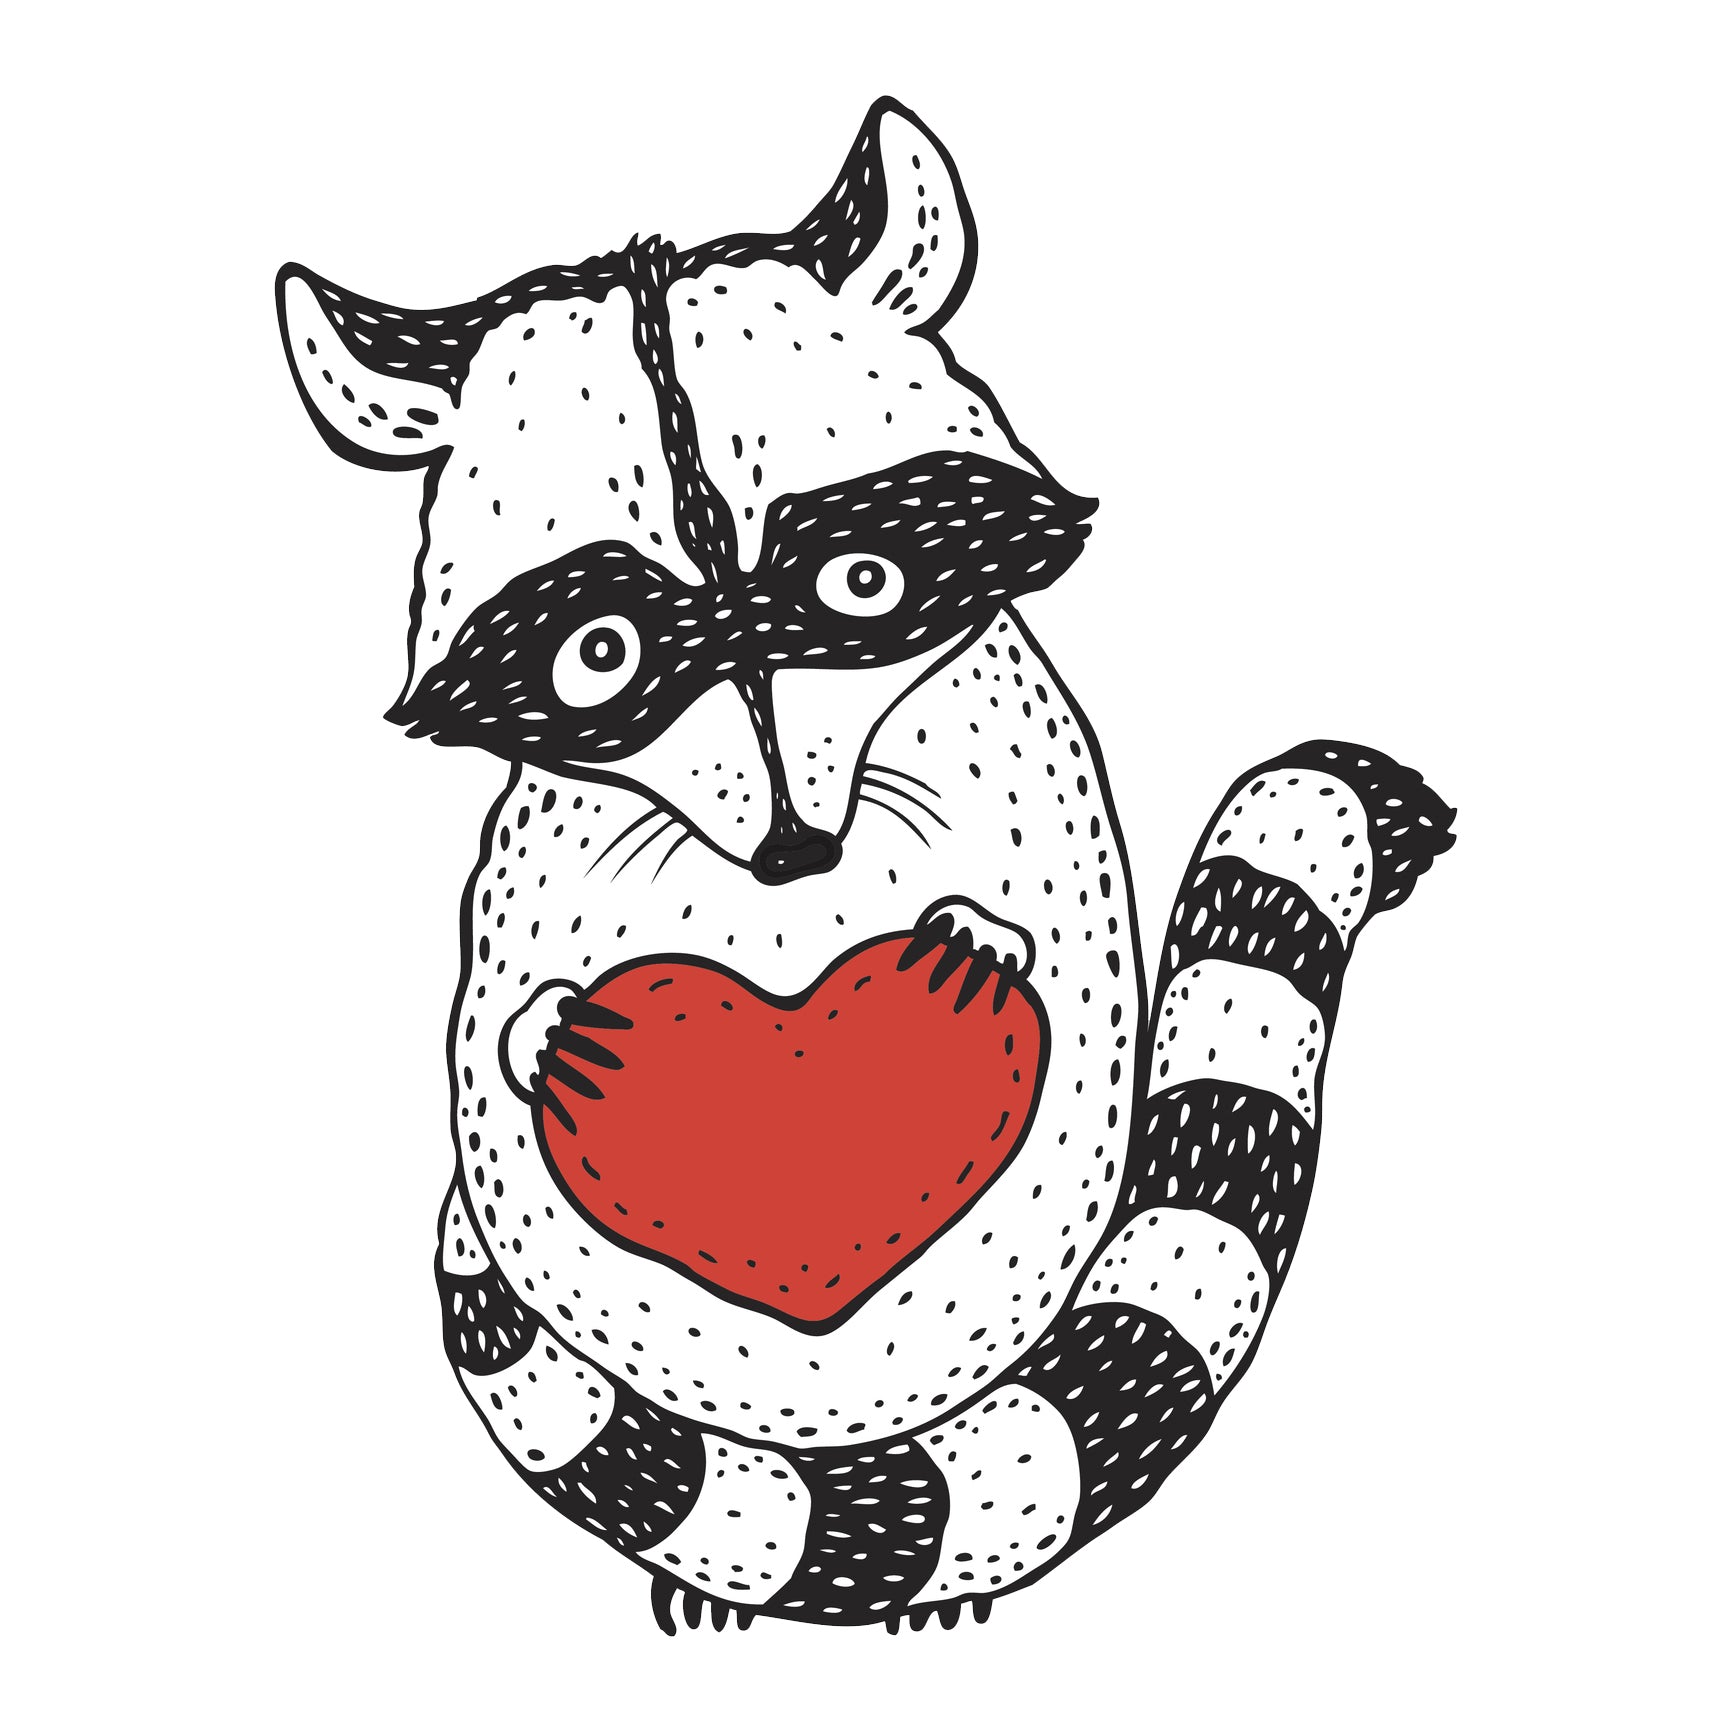 Cute Little Black and White Racoon with Red Heart Vinyl Decal Sticker